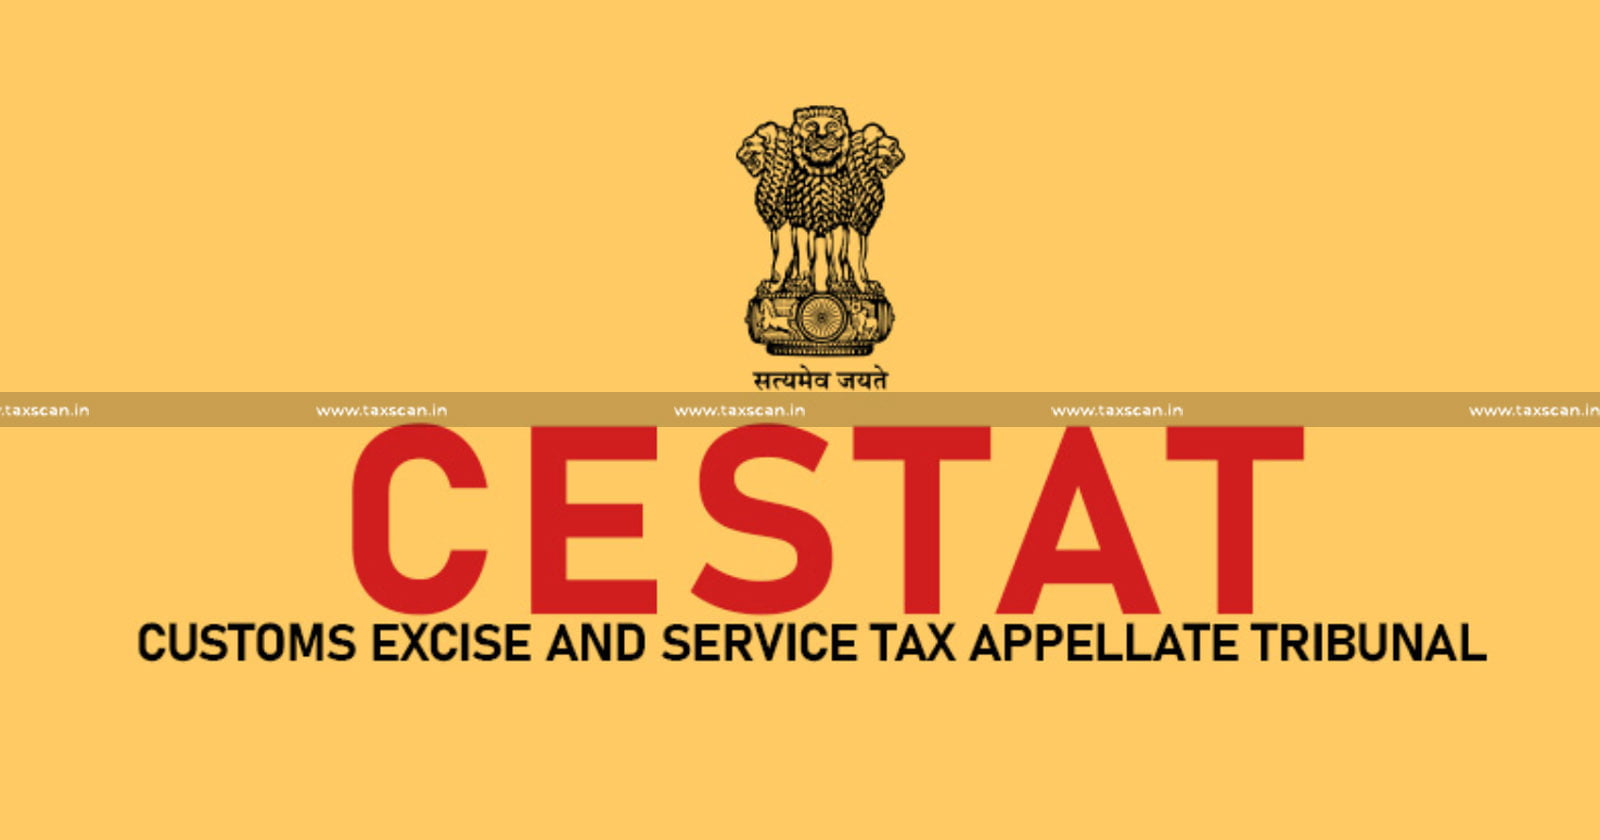 CESTAT Allahabad - CESTAT - Excise Act Limitation Period - CESTAT Rulings on Duty Evasion - Extended Limitation Period Excise Act - Taxscan